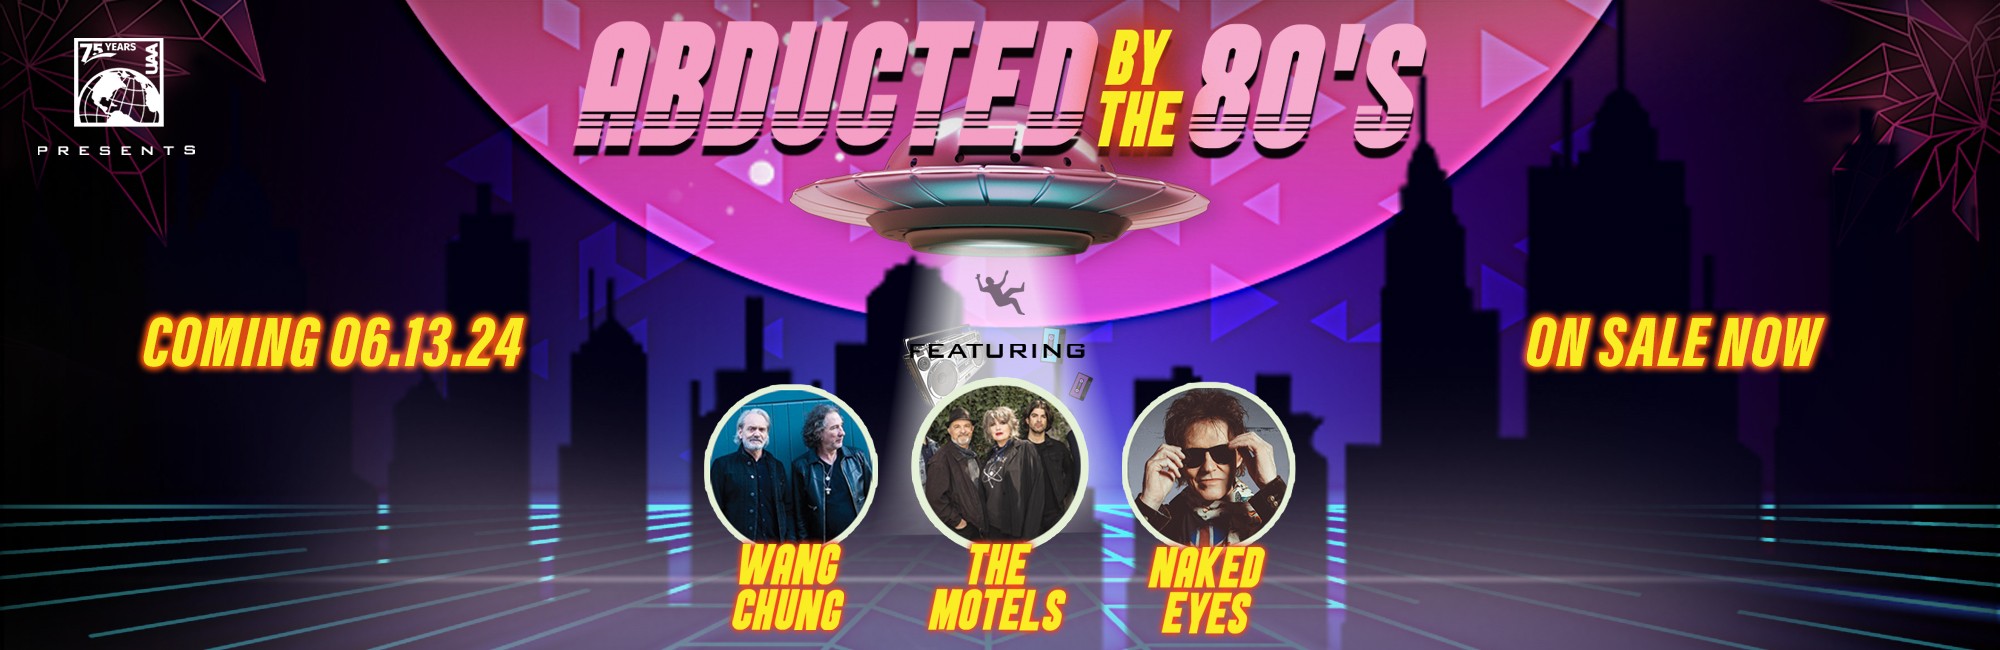 Abducted by the 80’s with Wang Chung, The Motels & Naked Eyes